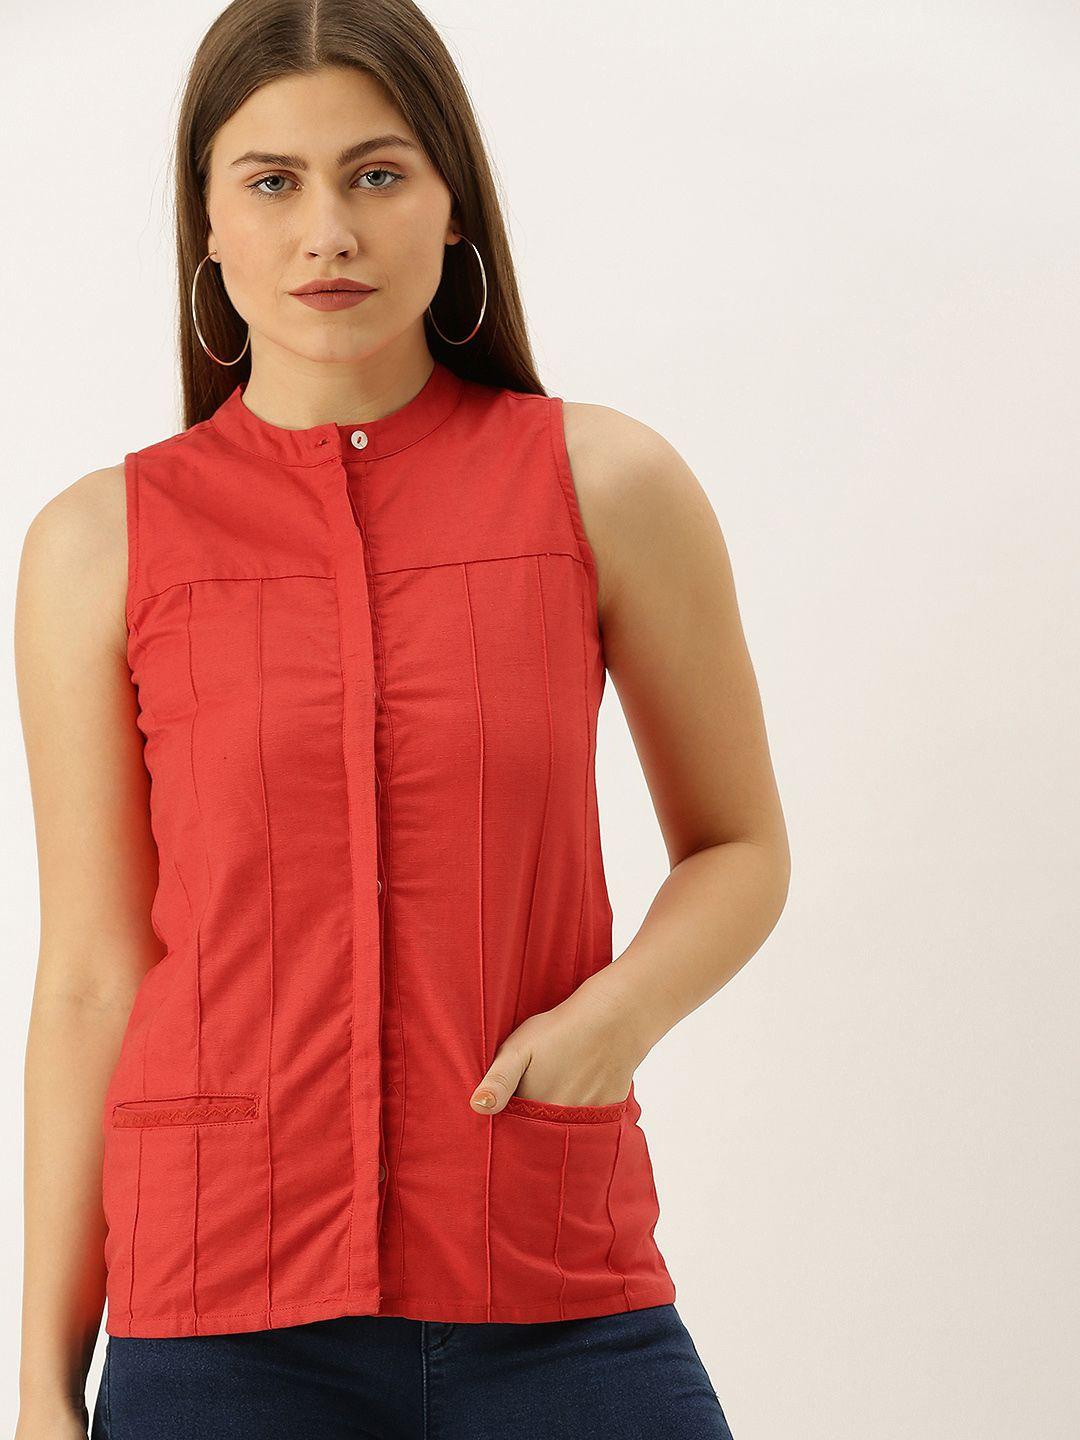 and women red solid shirt style top